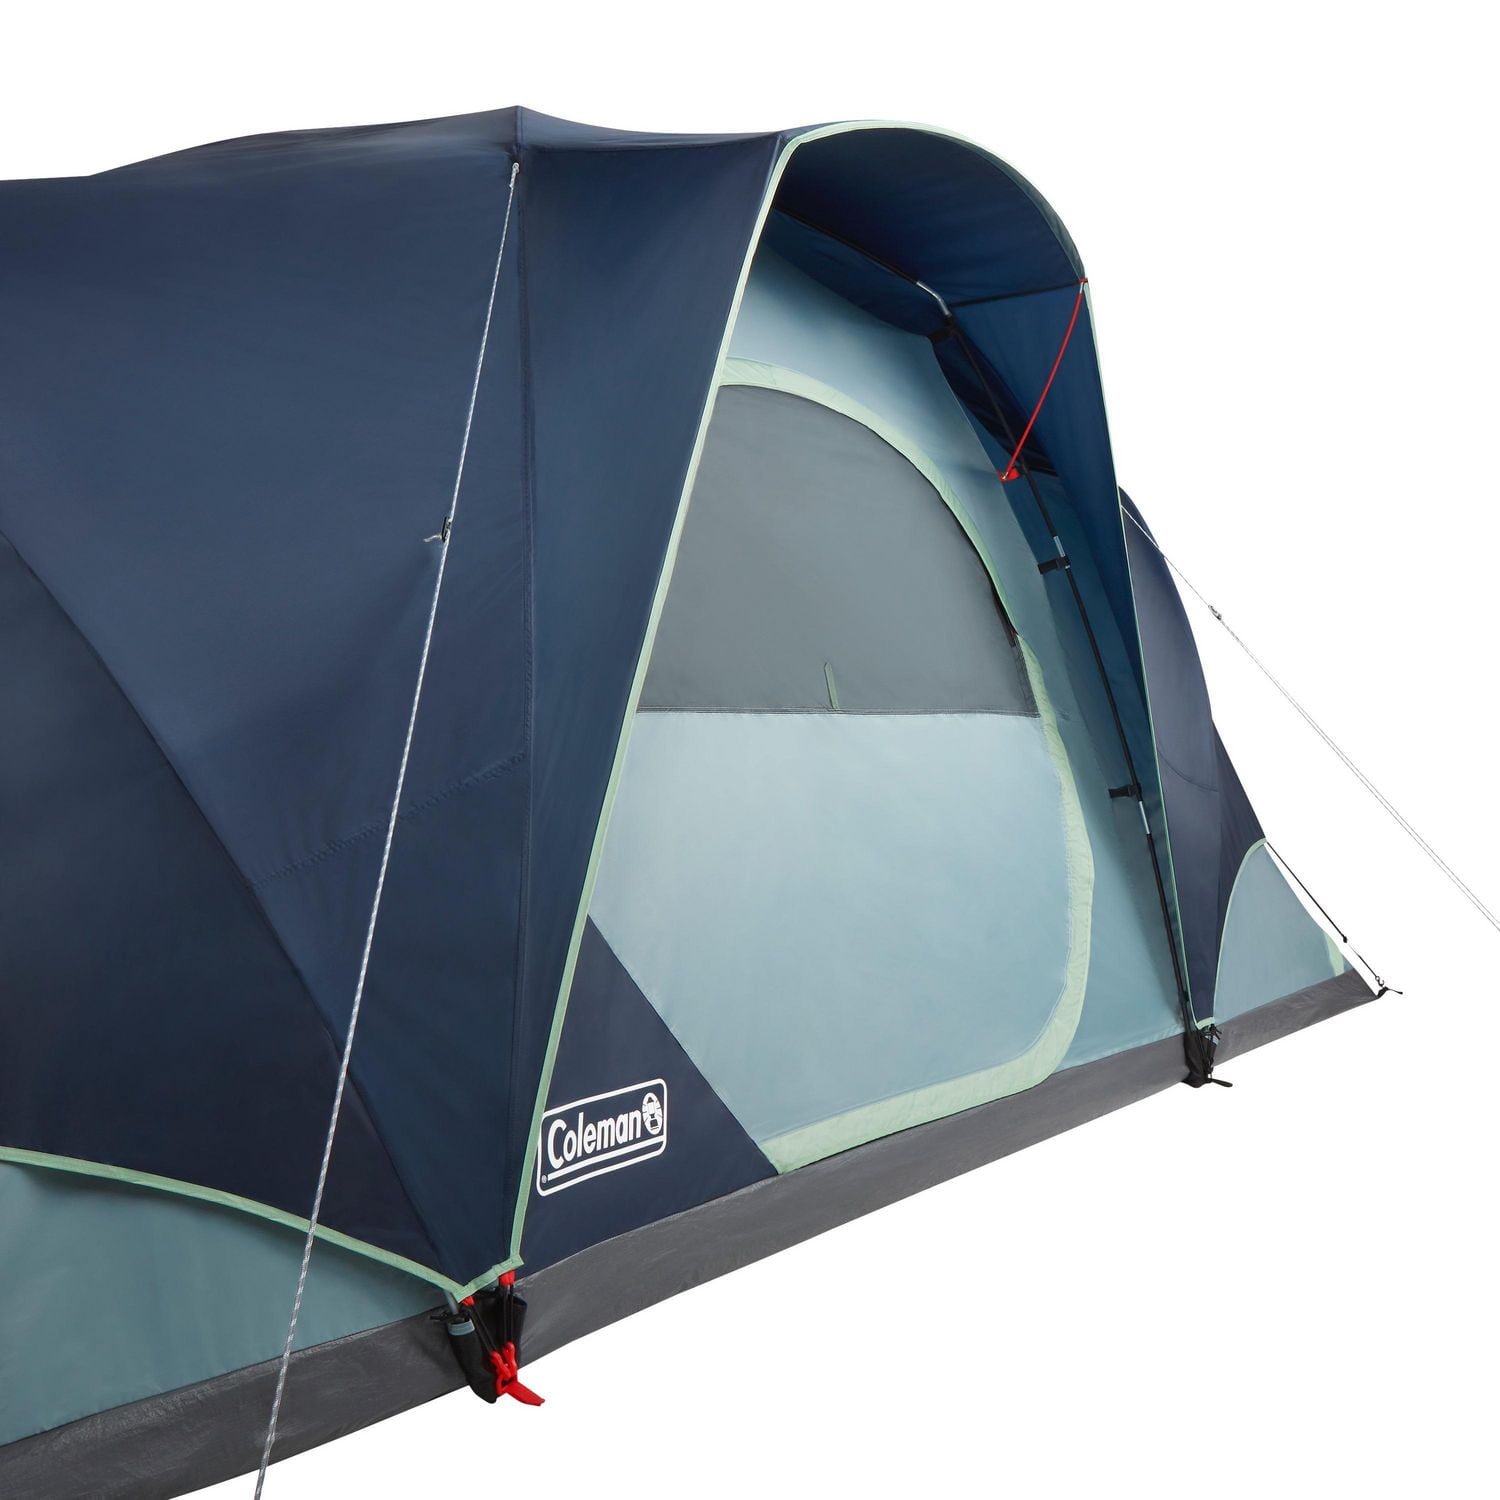 Core 6 Person Lighted Dome Tent with Full Rainfly Review